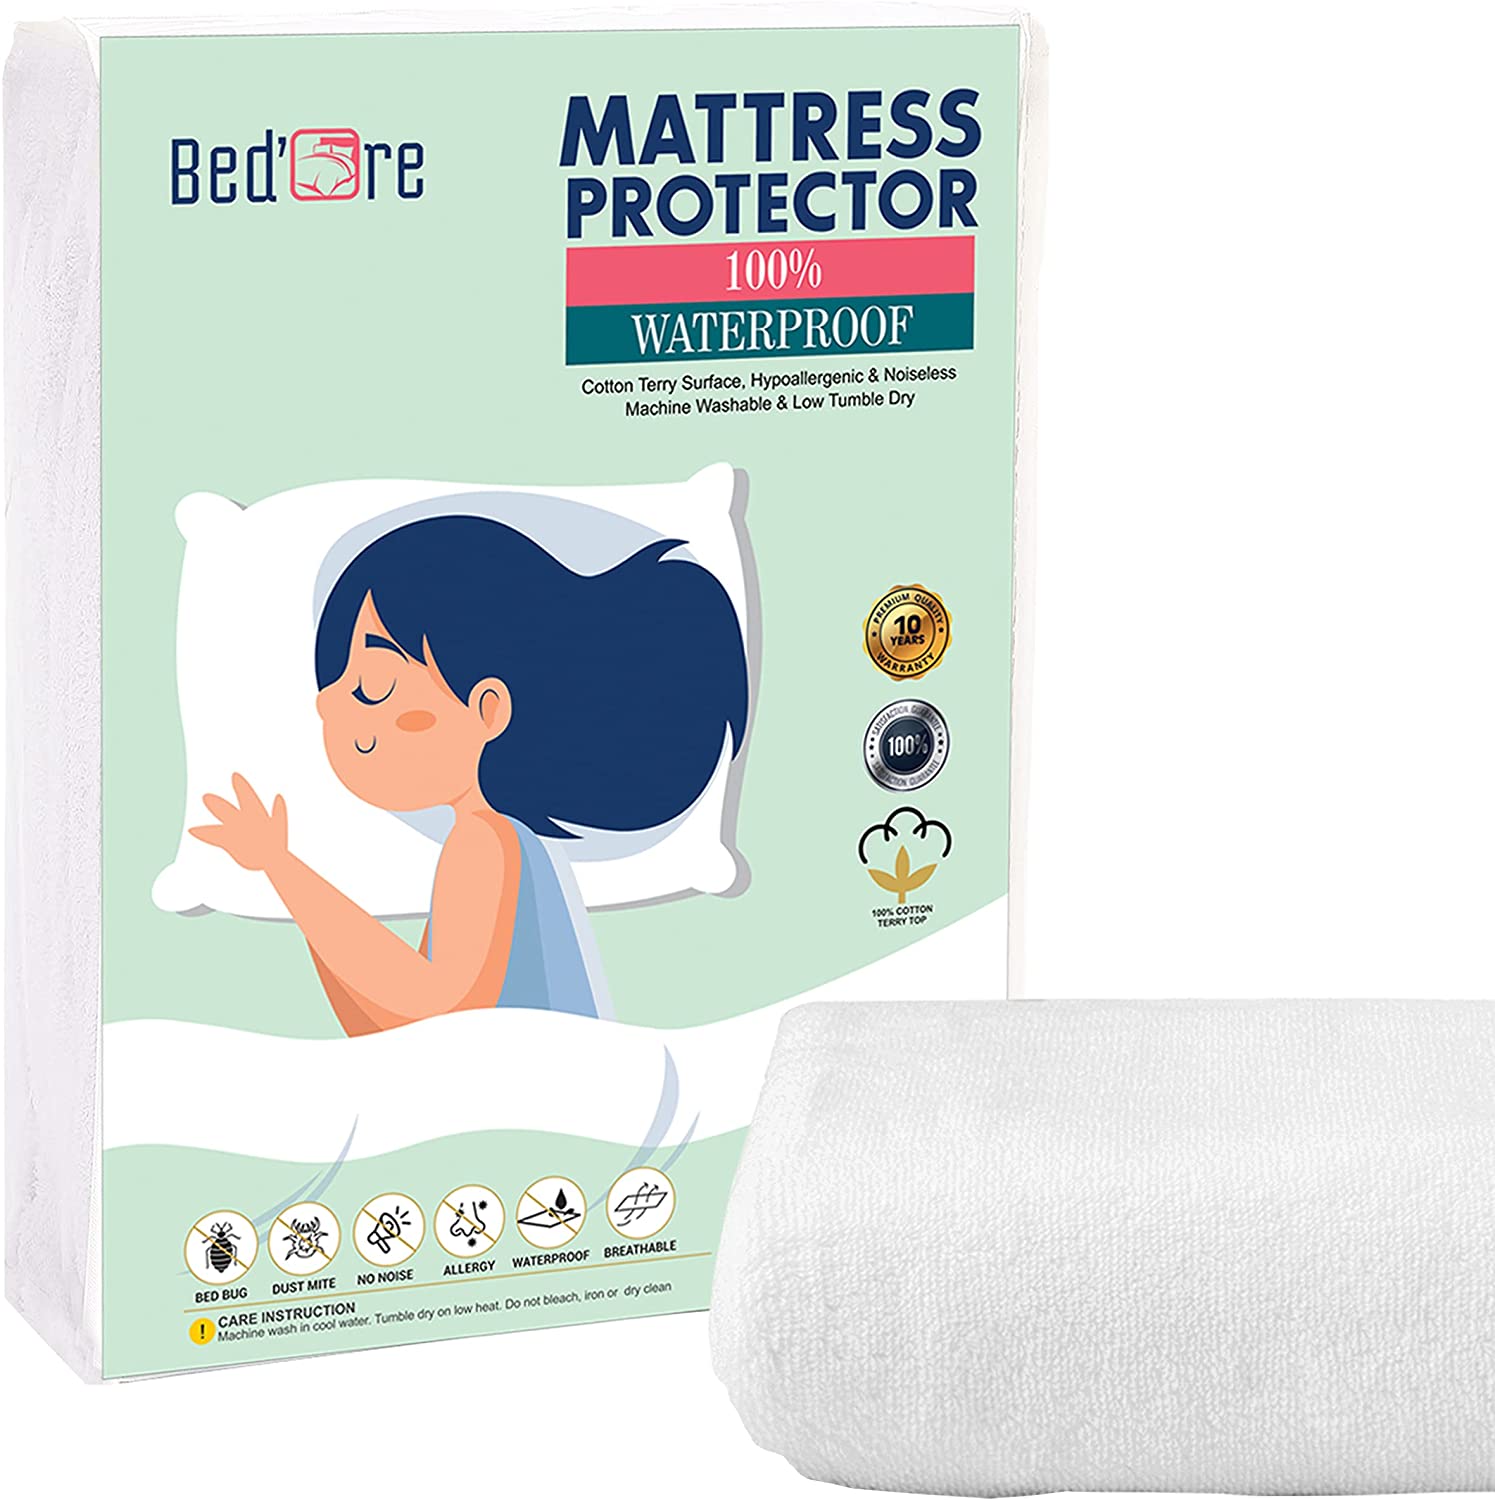 BedOre 100% Cotton Terry Top Double-Size Waterproof Fitted Mattress Cover with 30 CM Stretch Skirt - Machine Washable - 137x190+30 cm 2